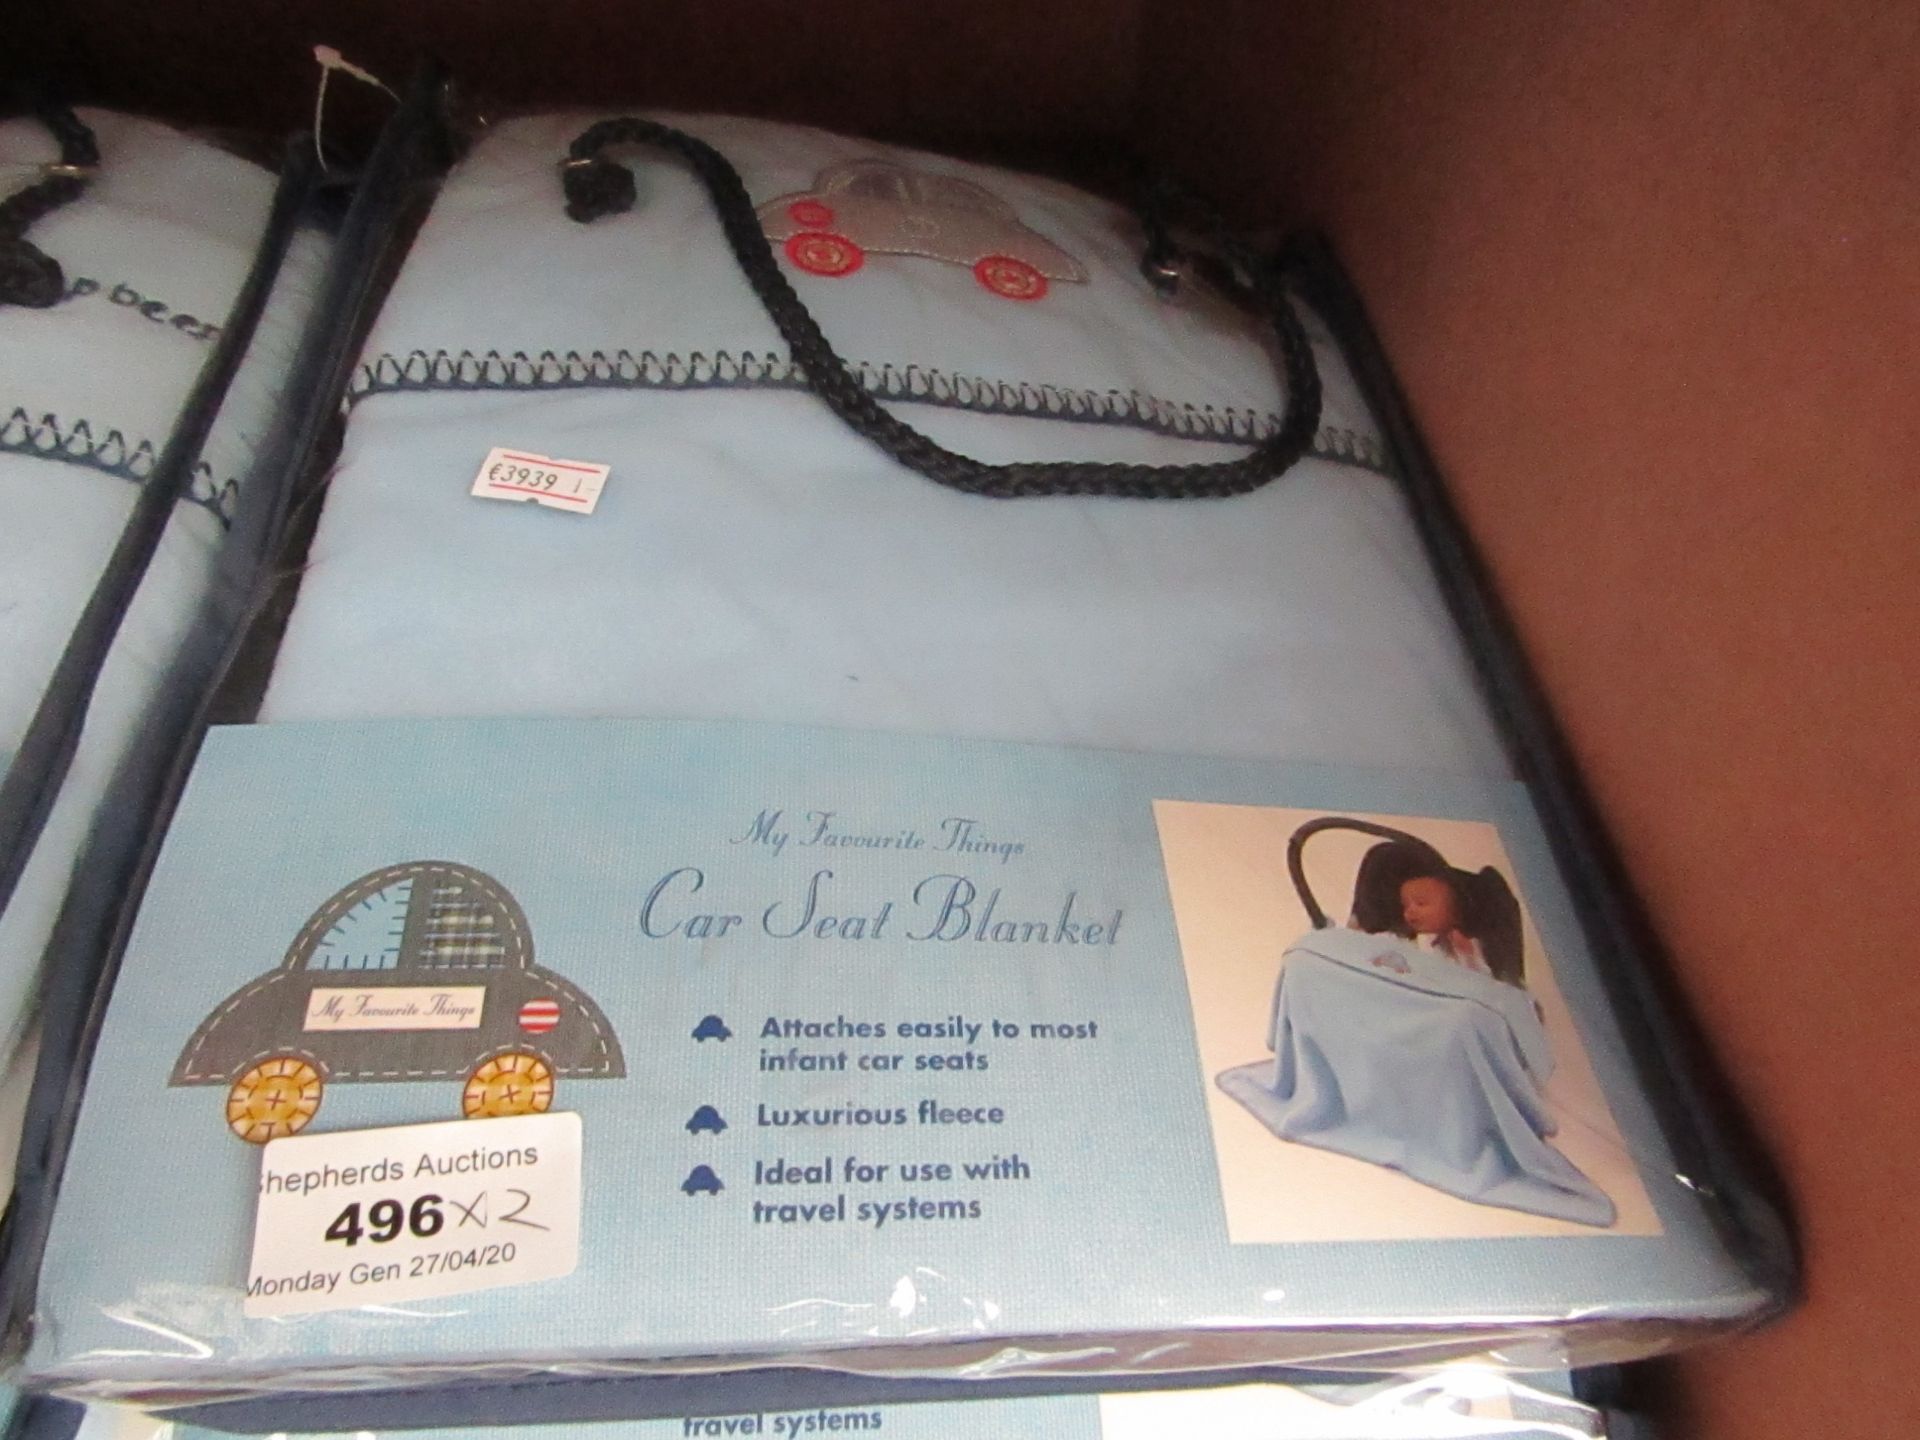 2x My Favourite things car seat Blankets - New in carry case.